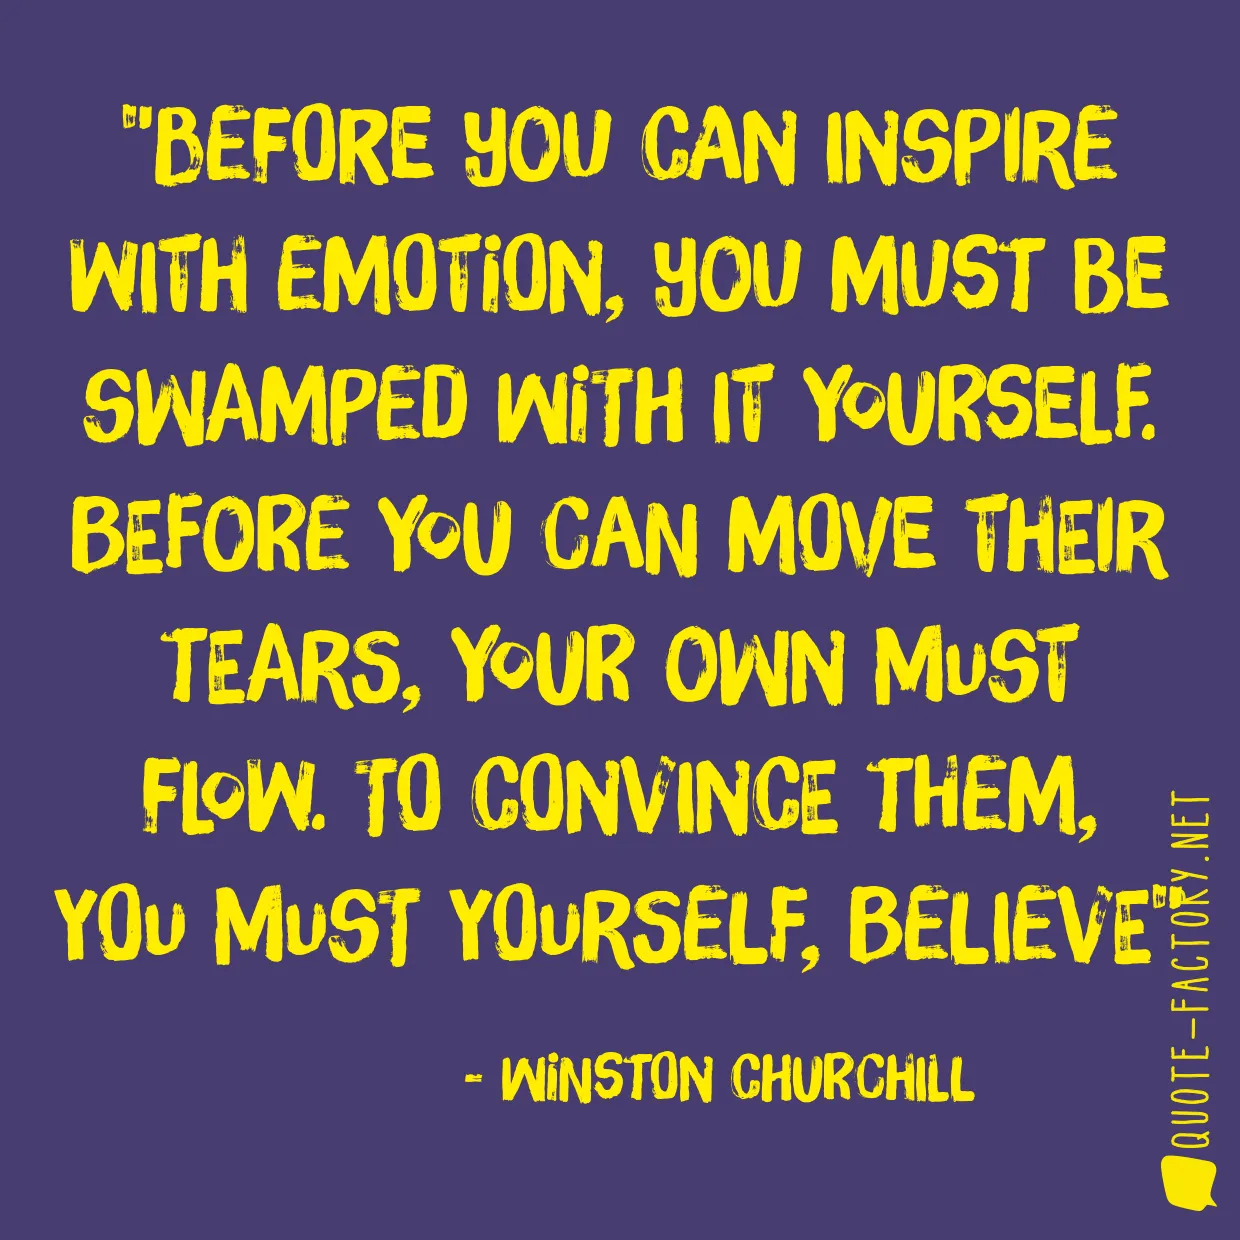 Before you can inspire with emotion, you must be swamped with it yourself. Before you can move their tears, your own must flow. To convince them, you must yourself, believe